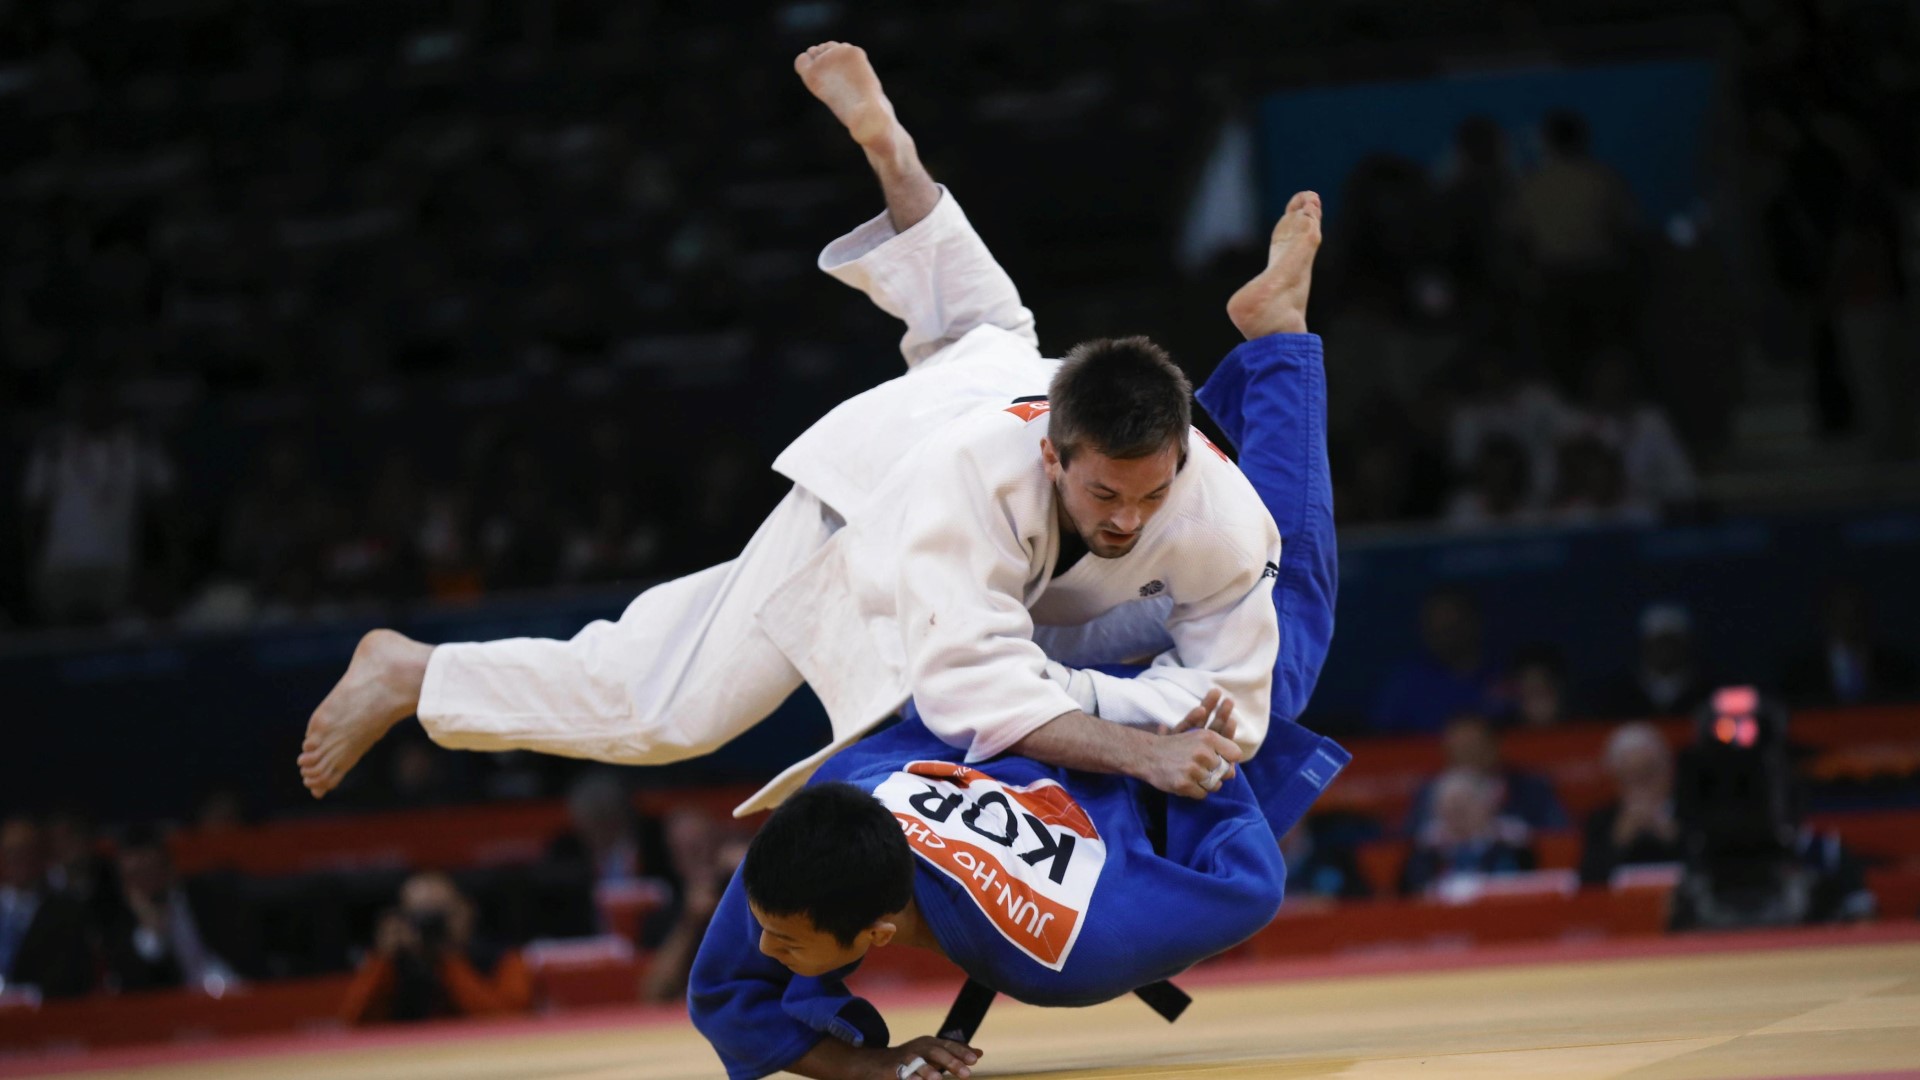 Prevent injuries in judo. 